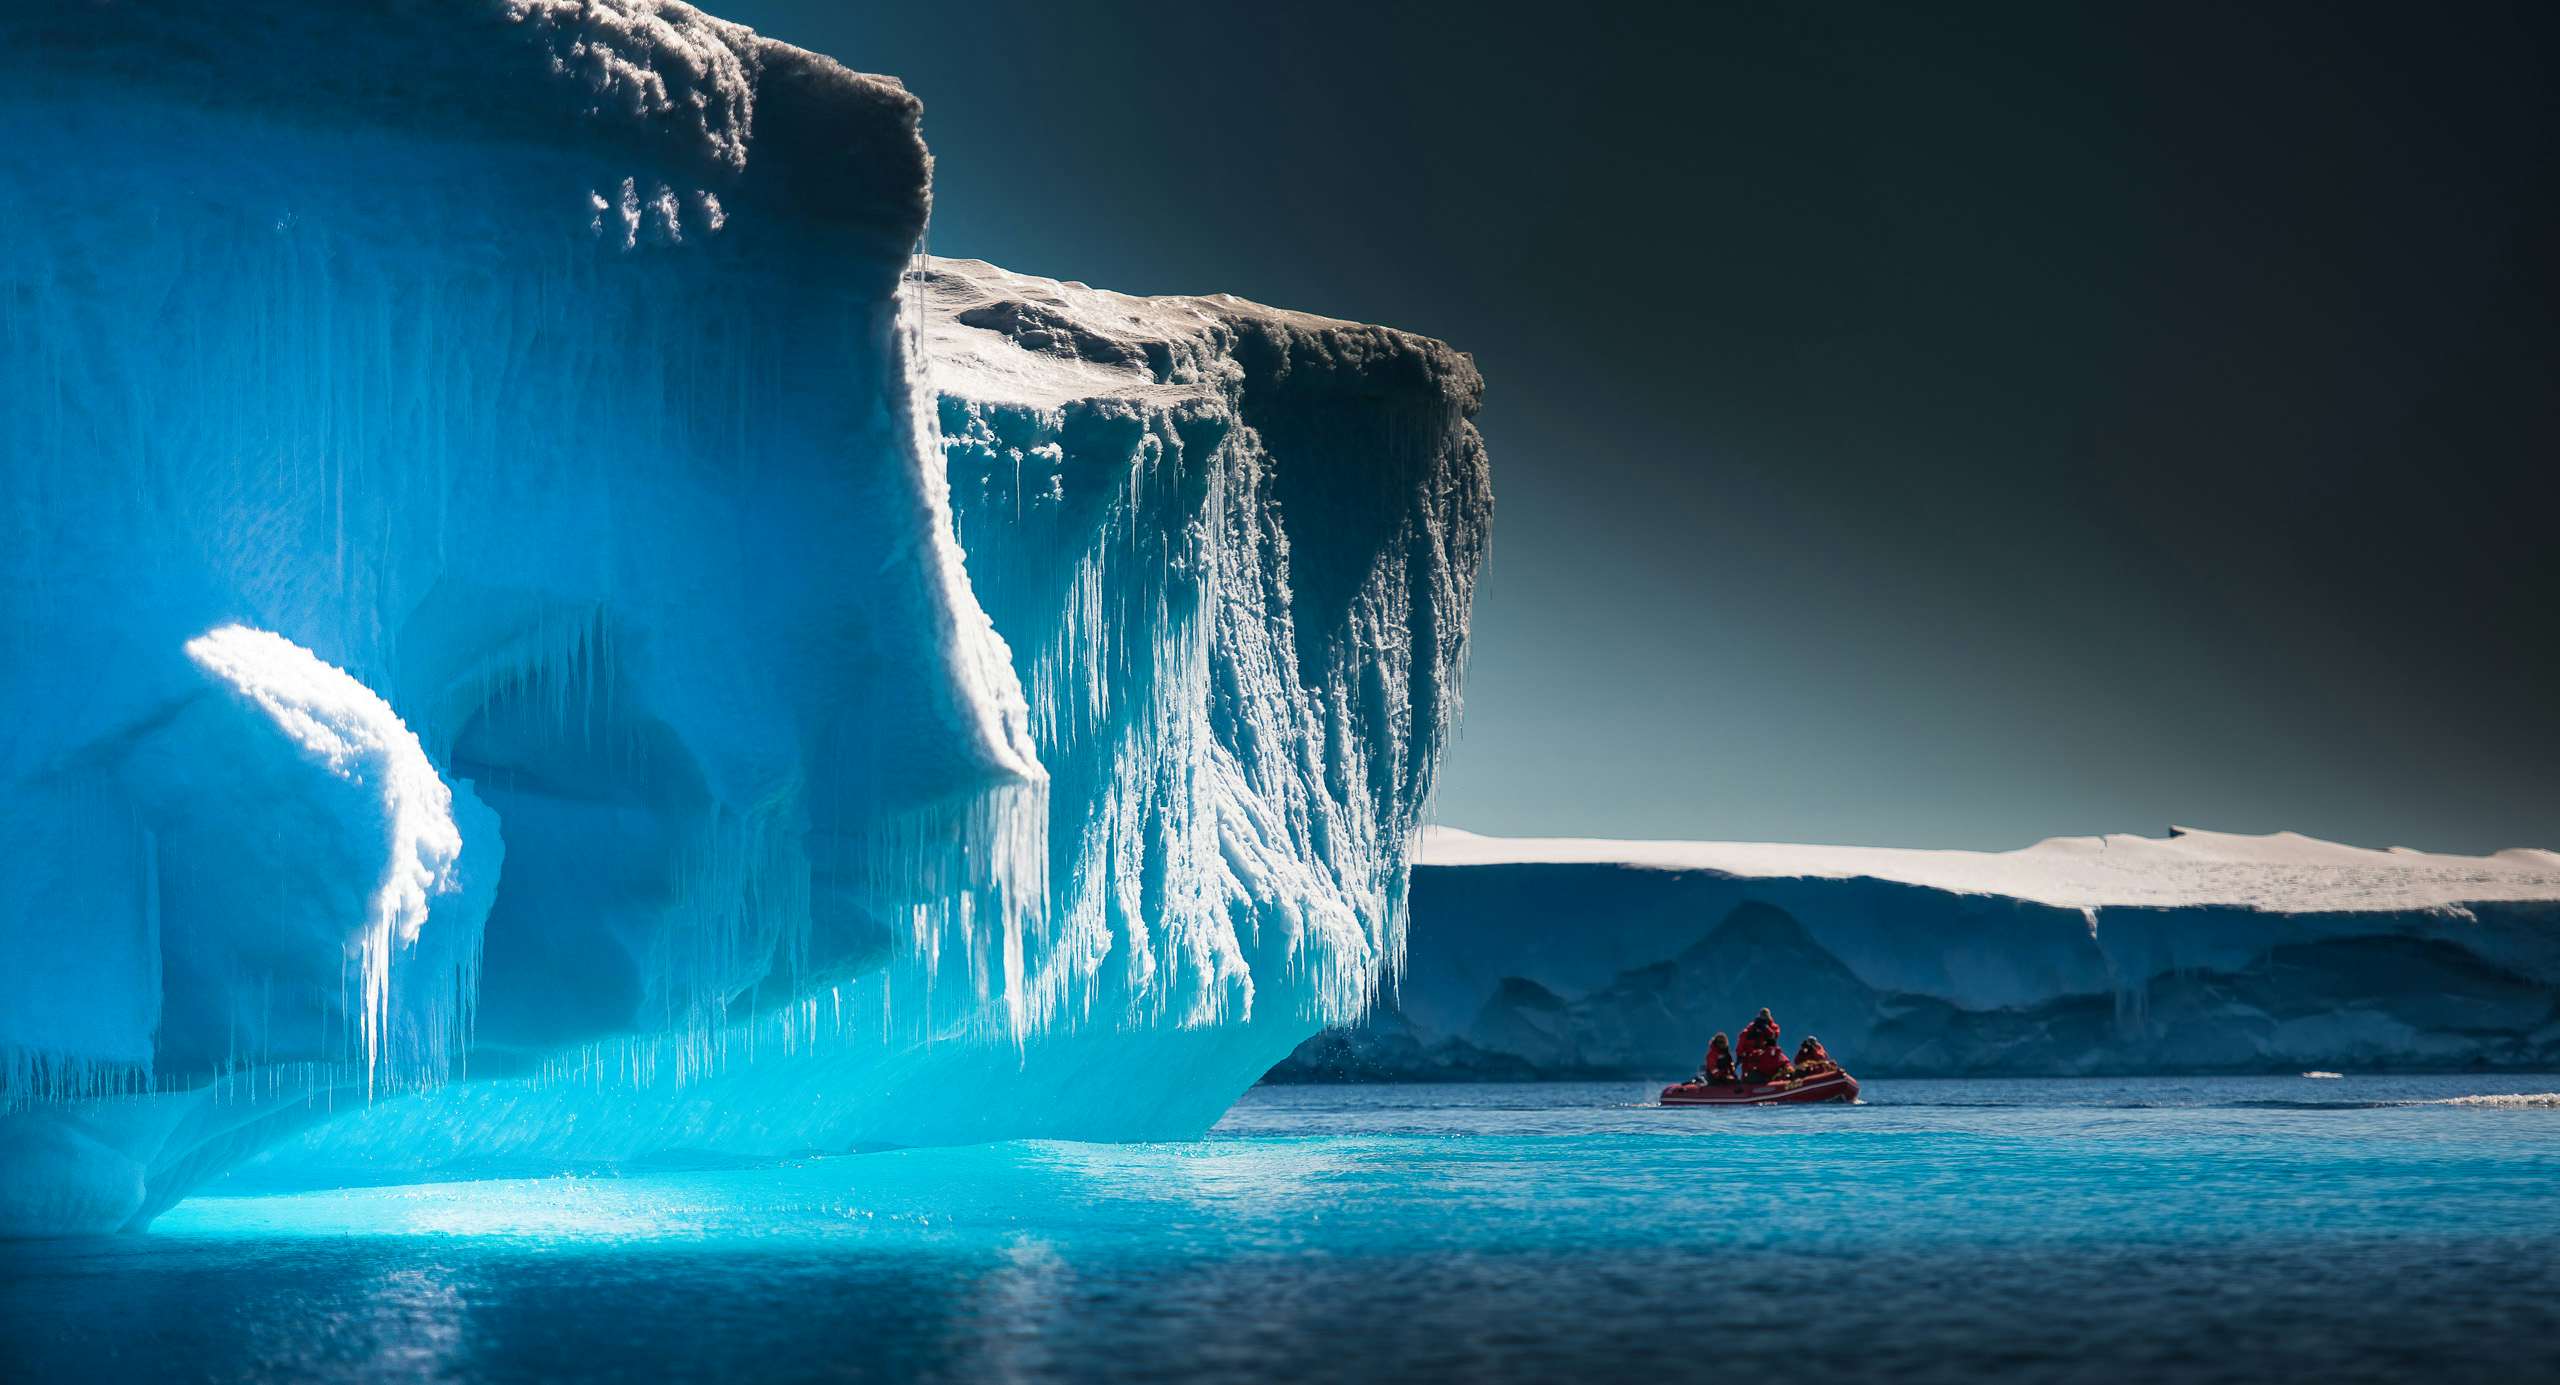 A small boat navigating the icy waters near a massive blue iceberg under a polar sky.